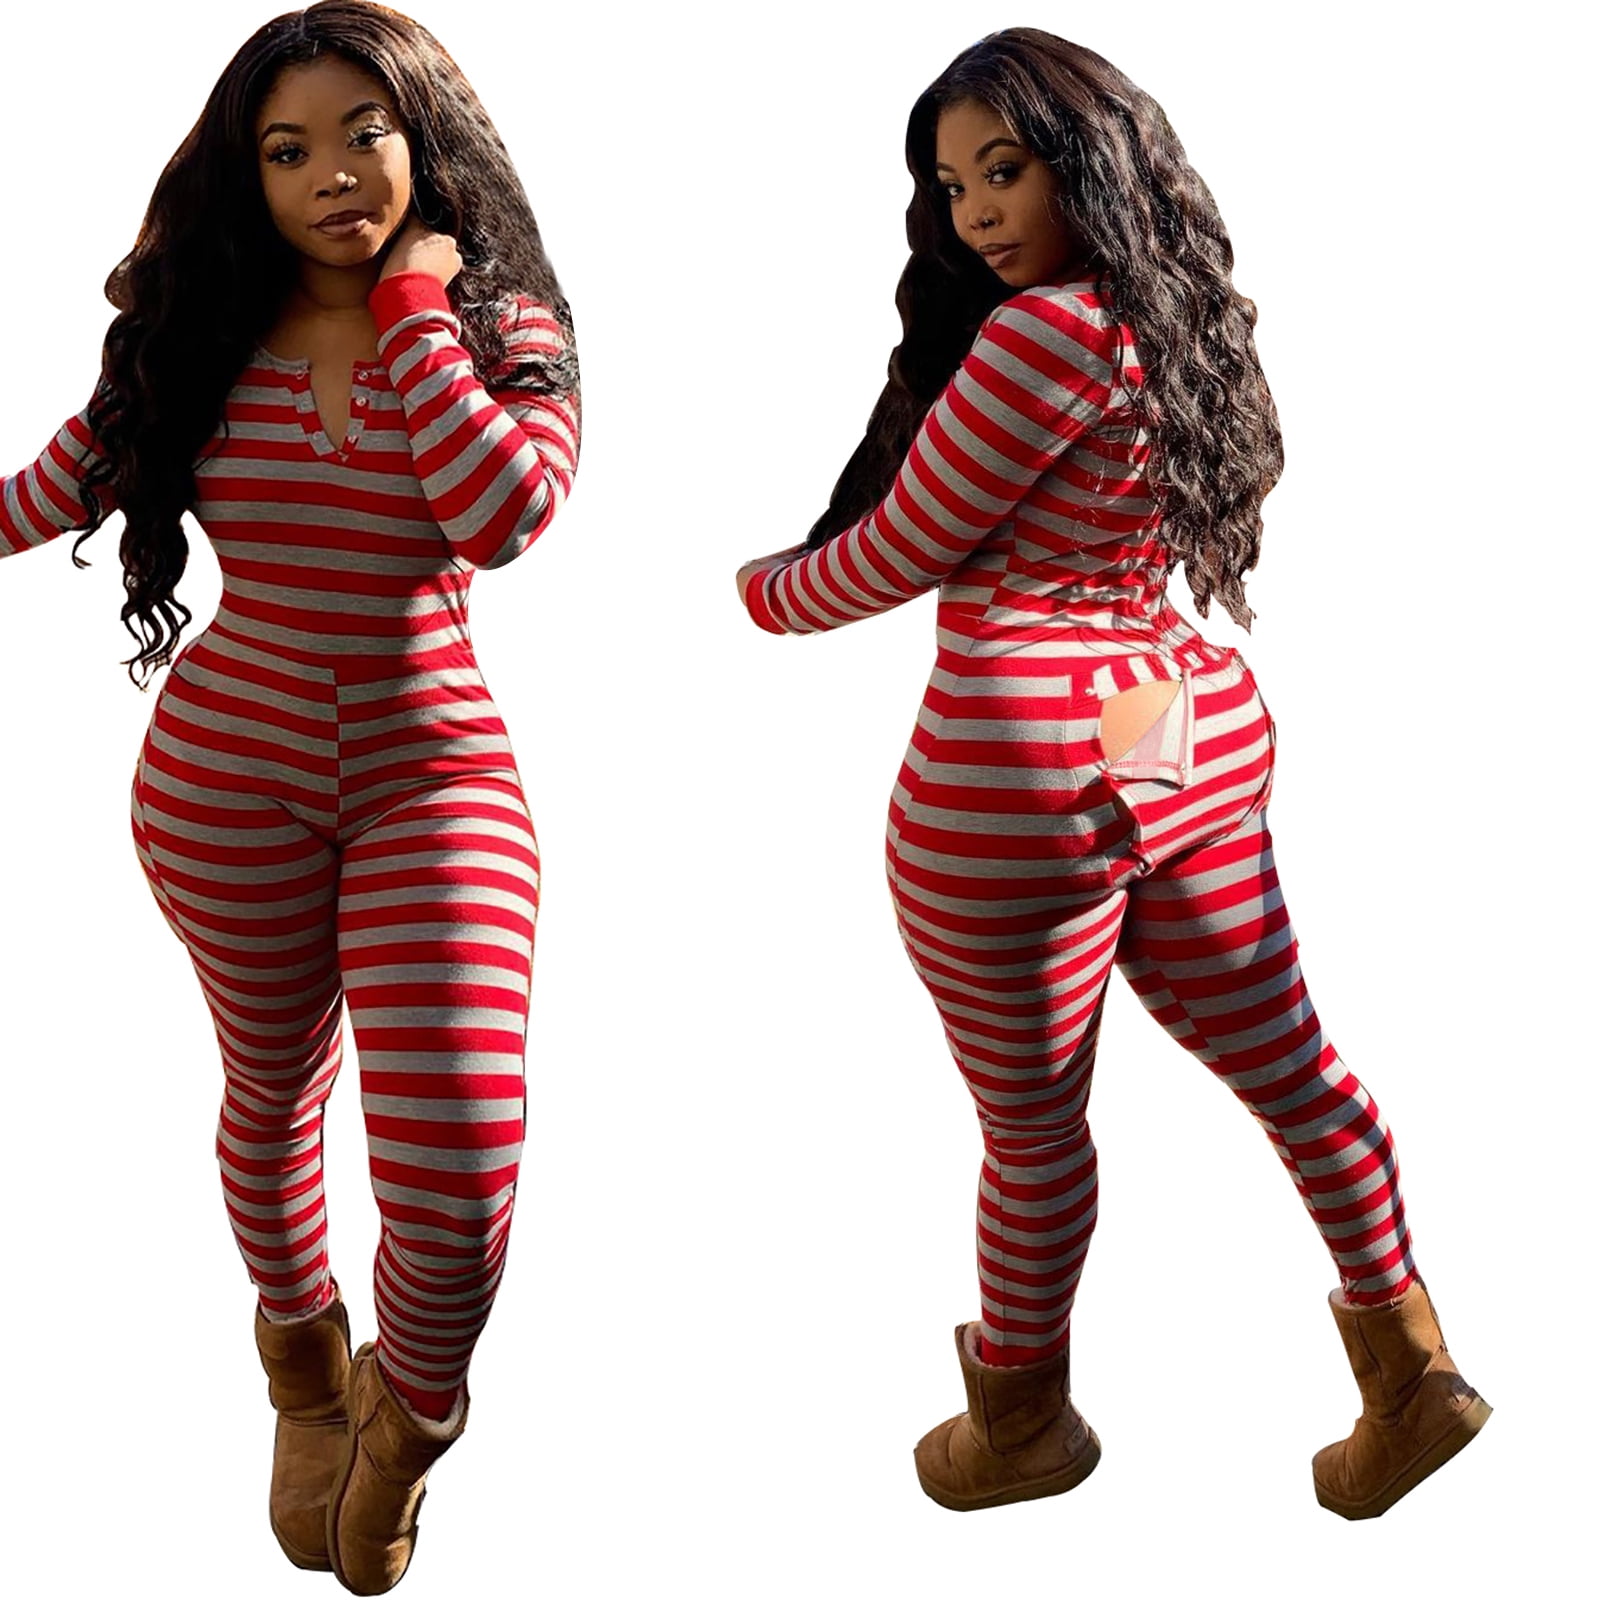 brandi yancey recommends onesie with back flap pic